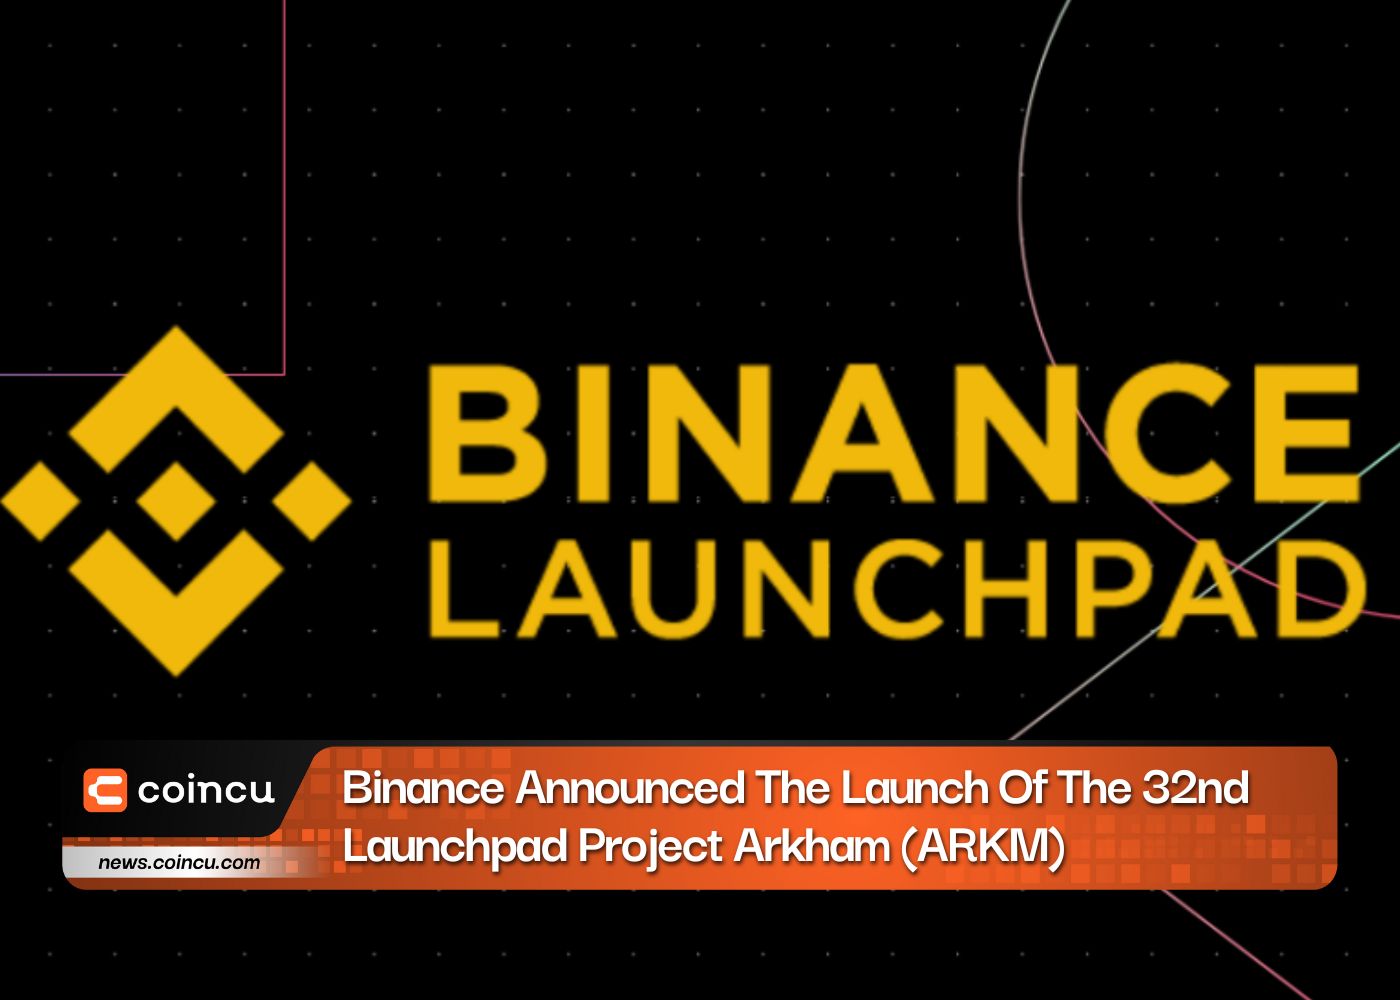 Binance Announced The Launch Of The 32nd Launchpad Project Arkham (ARKM)